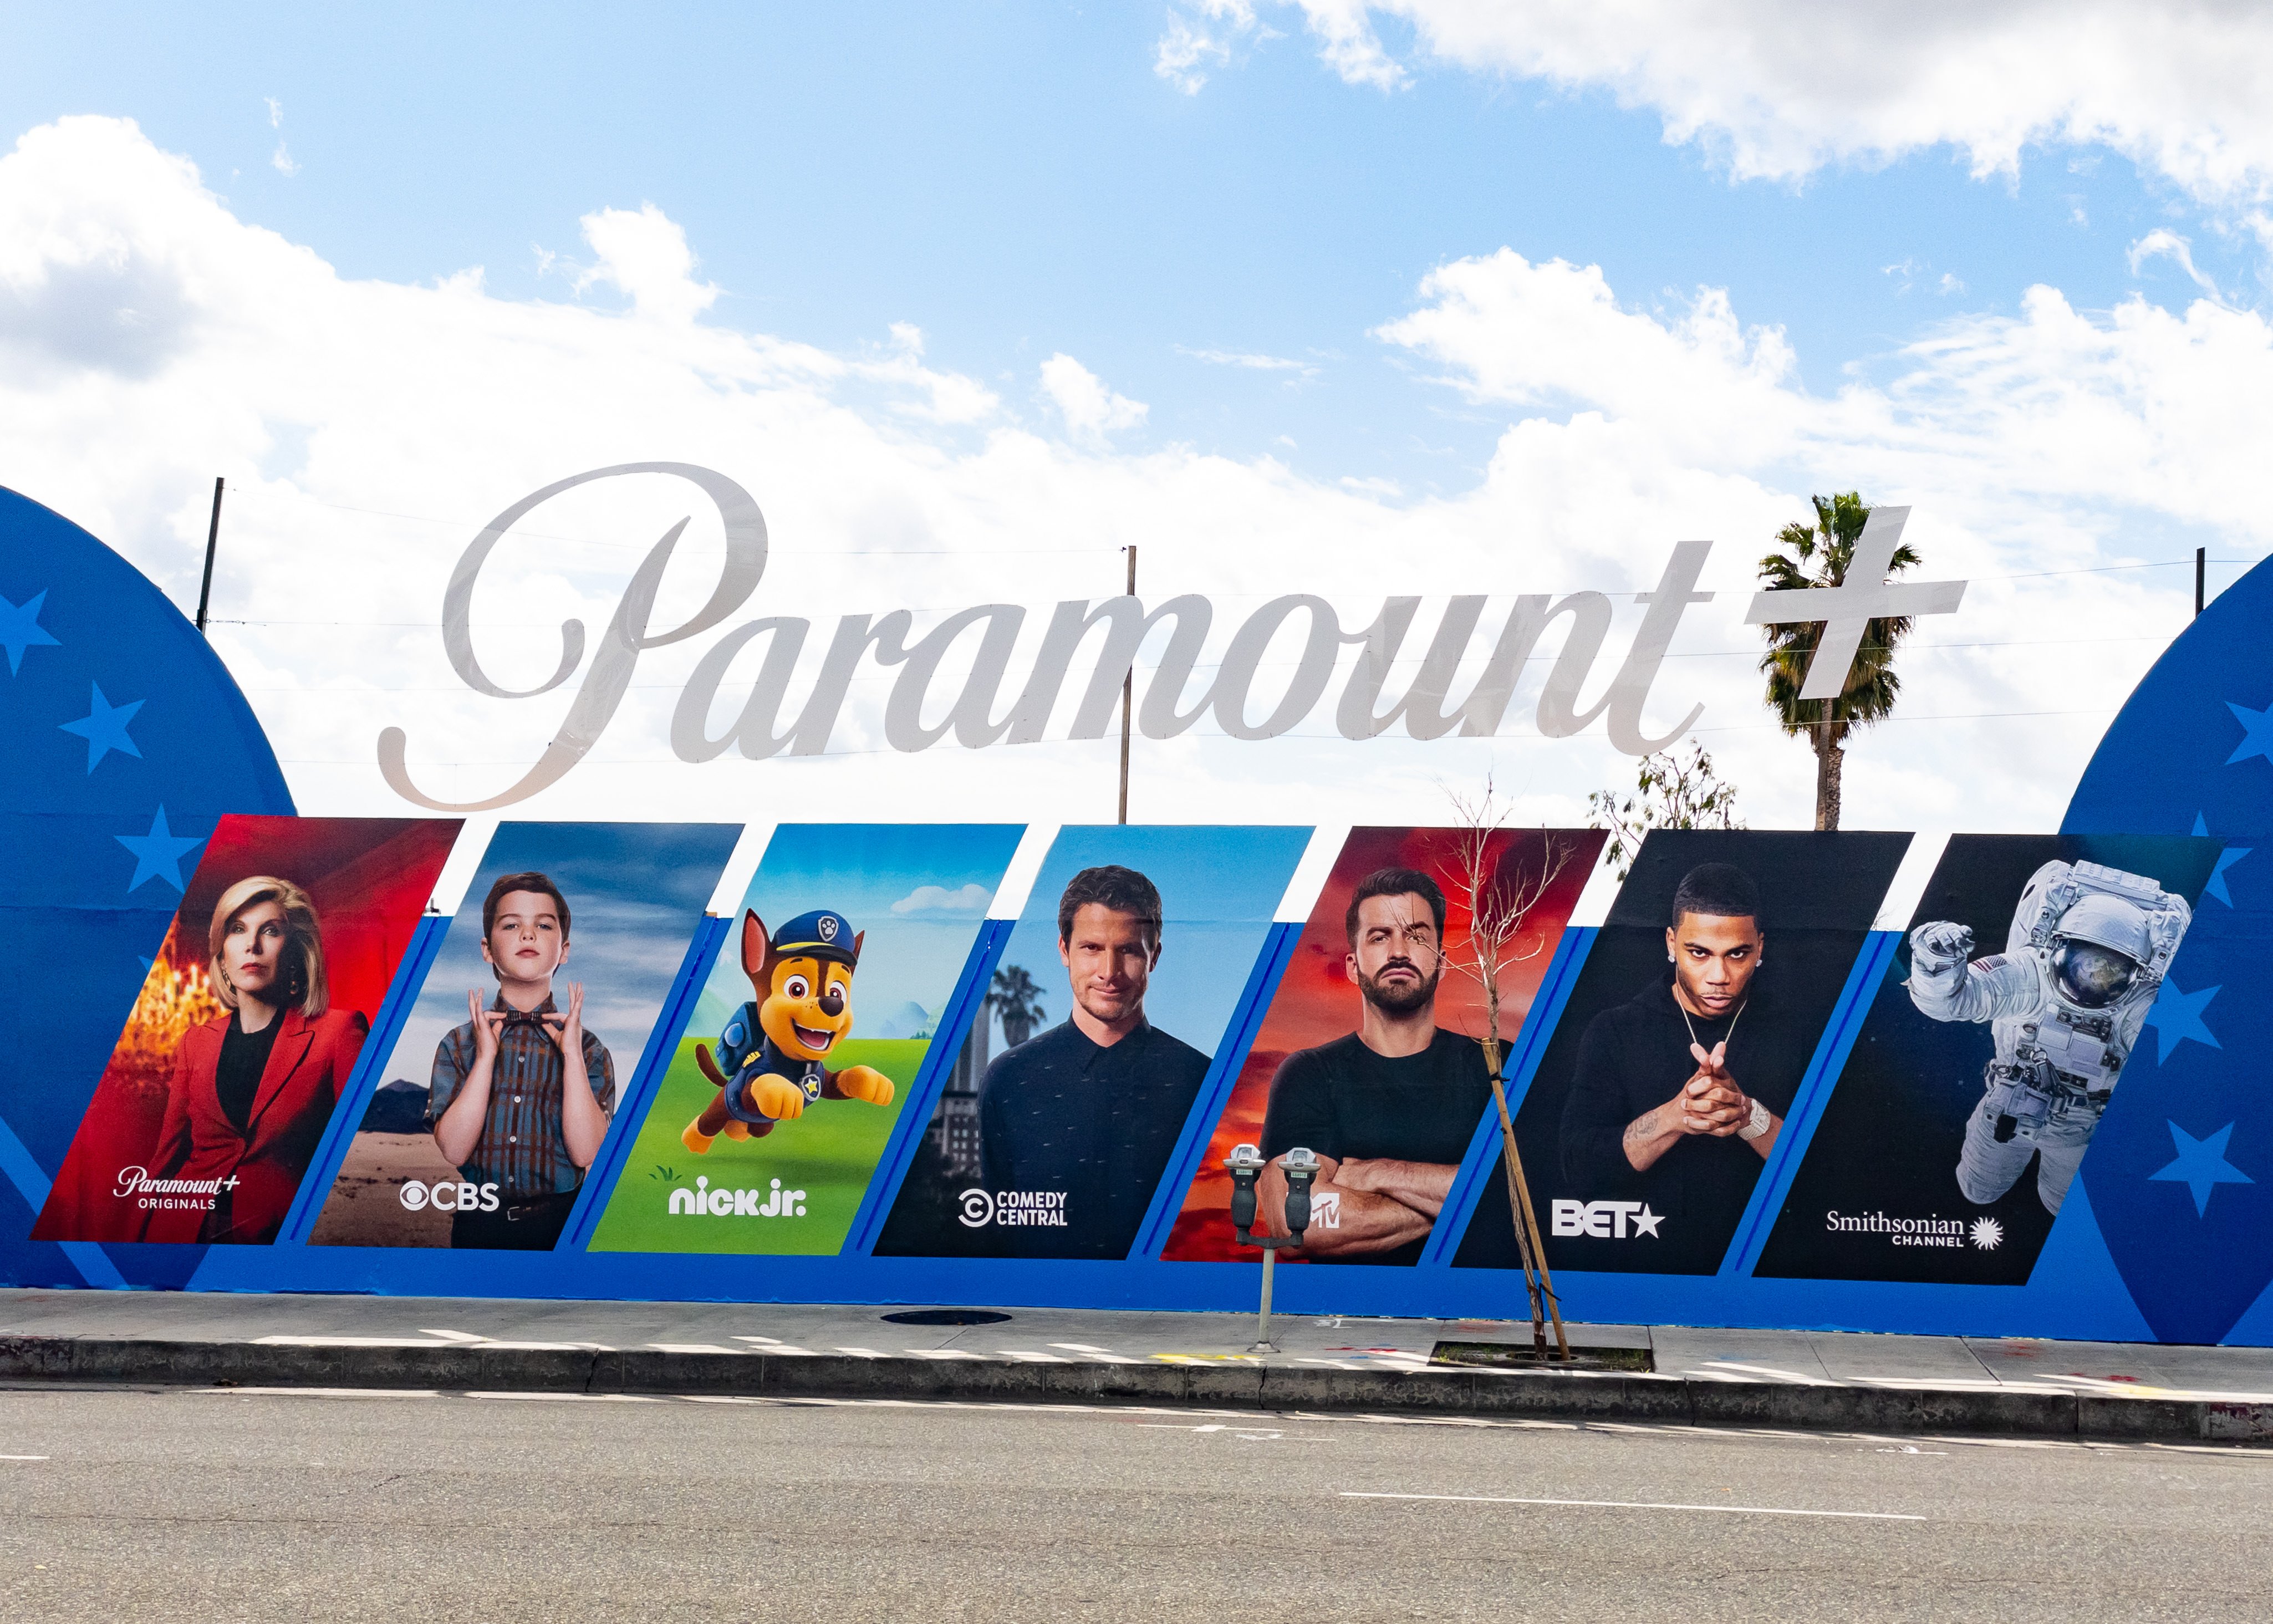 General views of the Paramount+ billboard campaign along the Sunset Strip